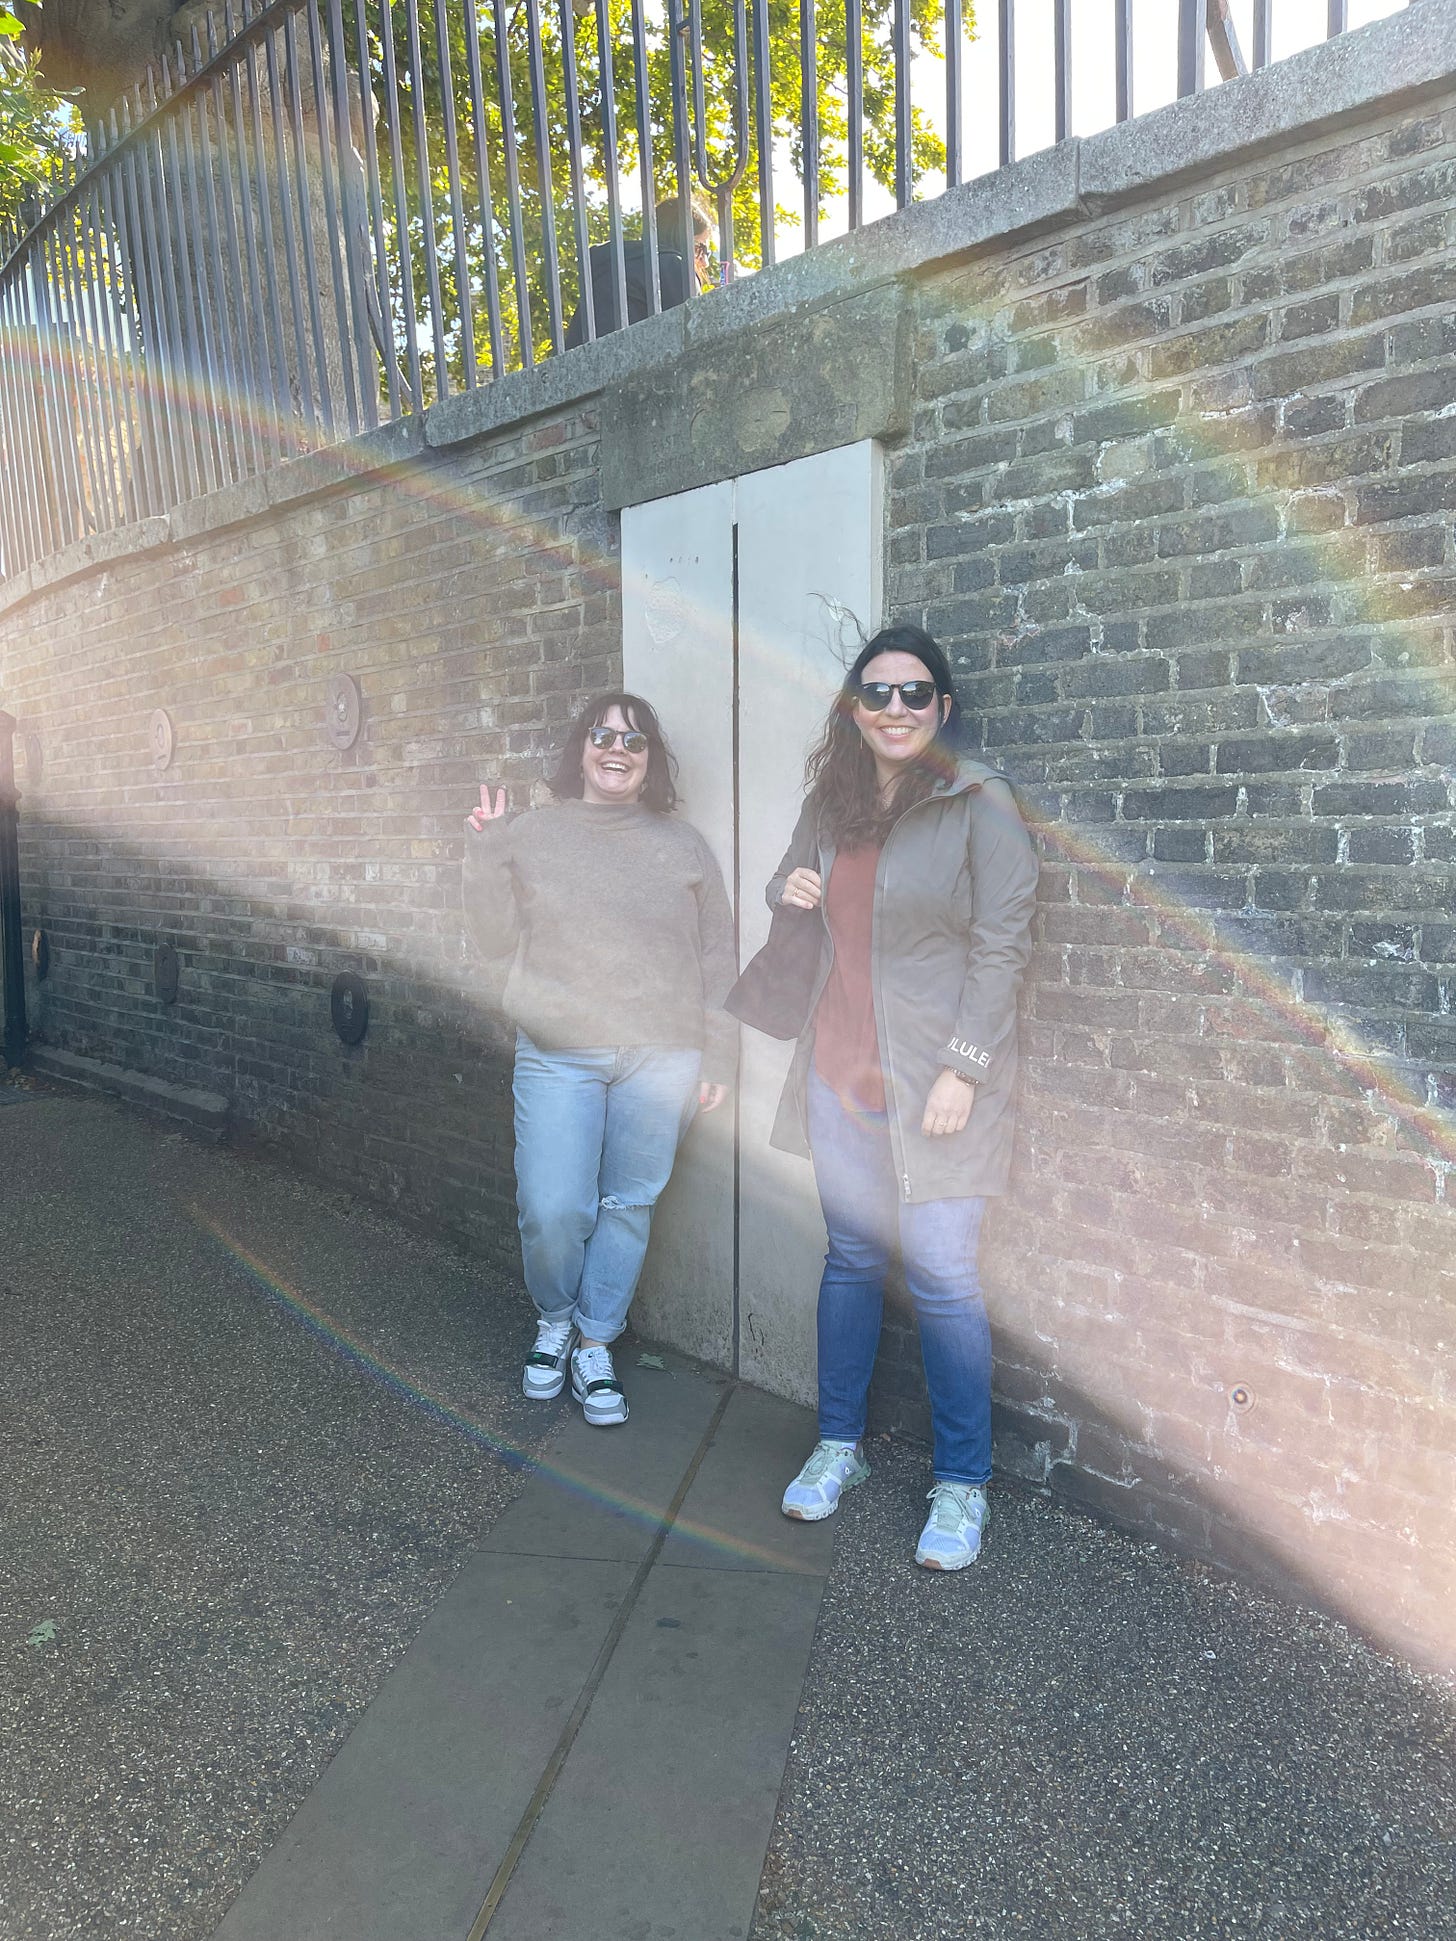 Me, in a green sweater, jeans, and air trainers, on one side of the prime meridian, and Julia, in a green coat and jeans, on the other side of it.